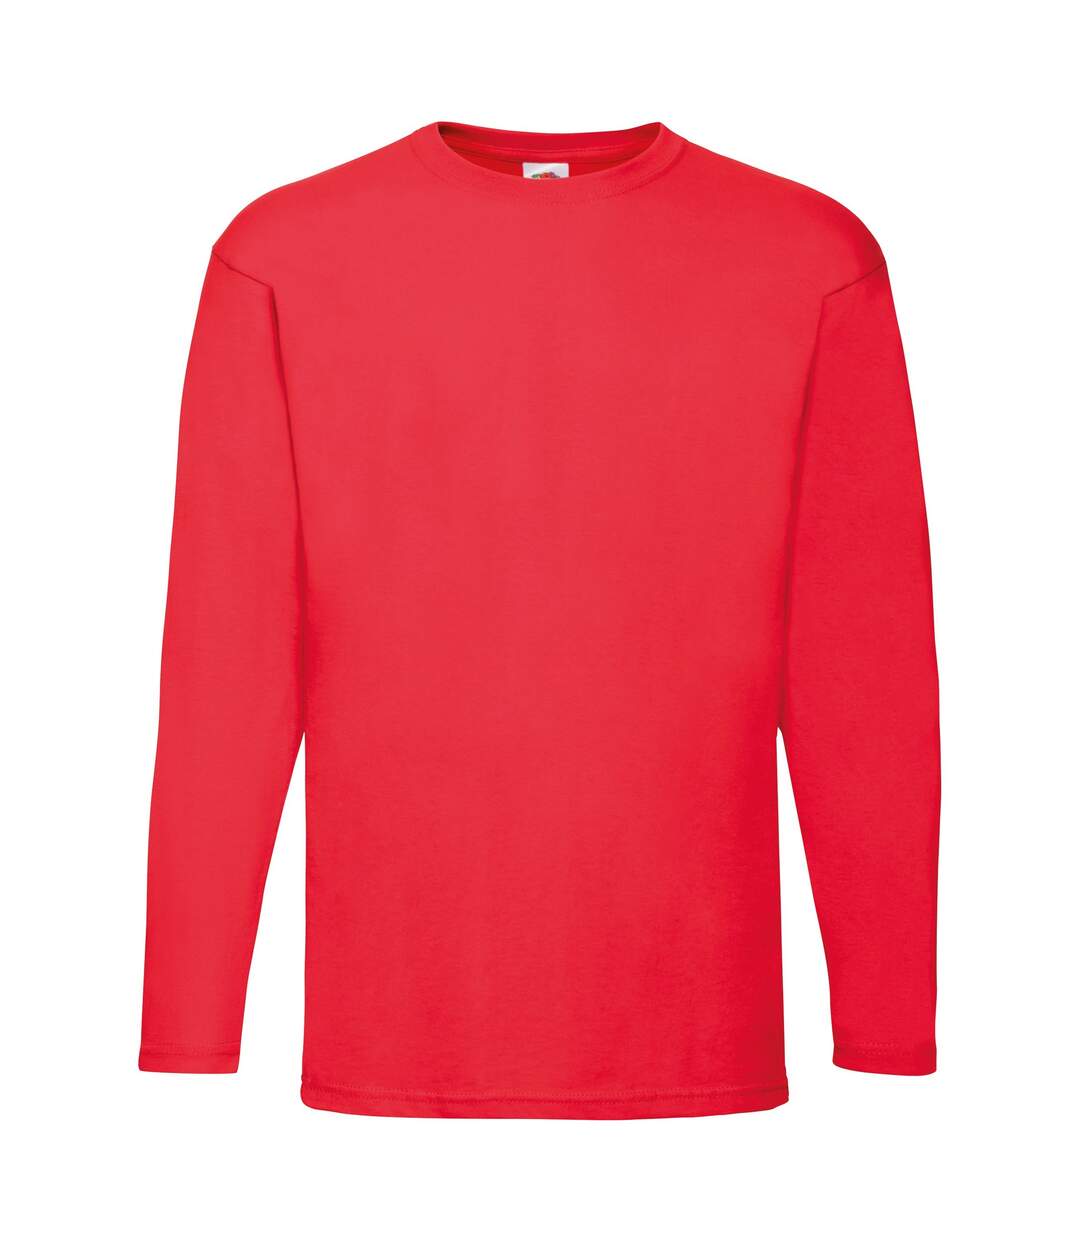 Fruit Of The Loom Mens Valueweight Crew Neck Long Sleeve T-Shirt (Red) - UTBC331